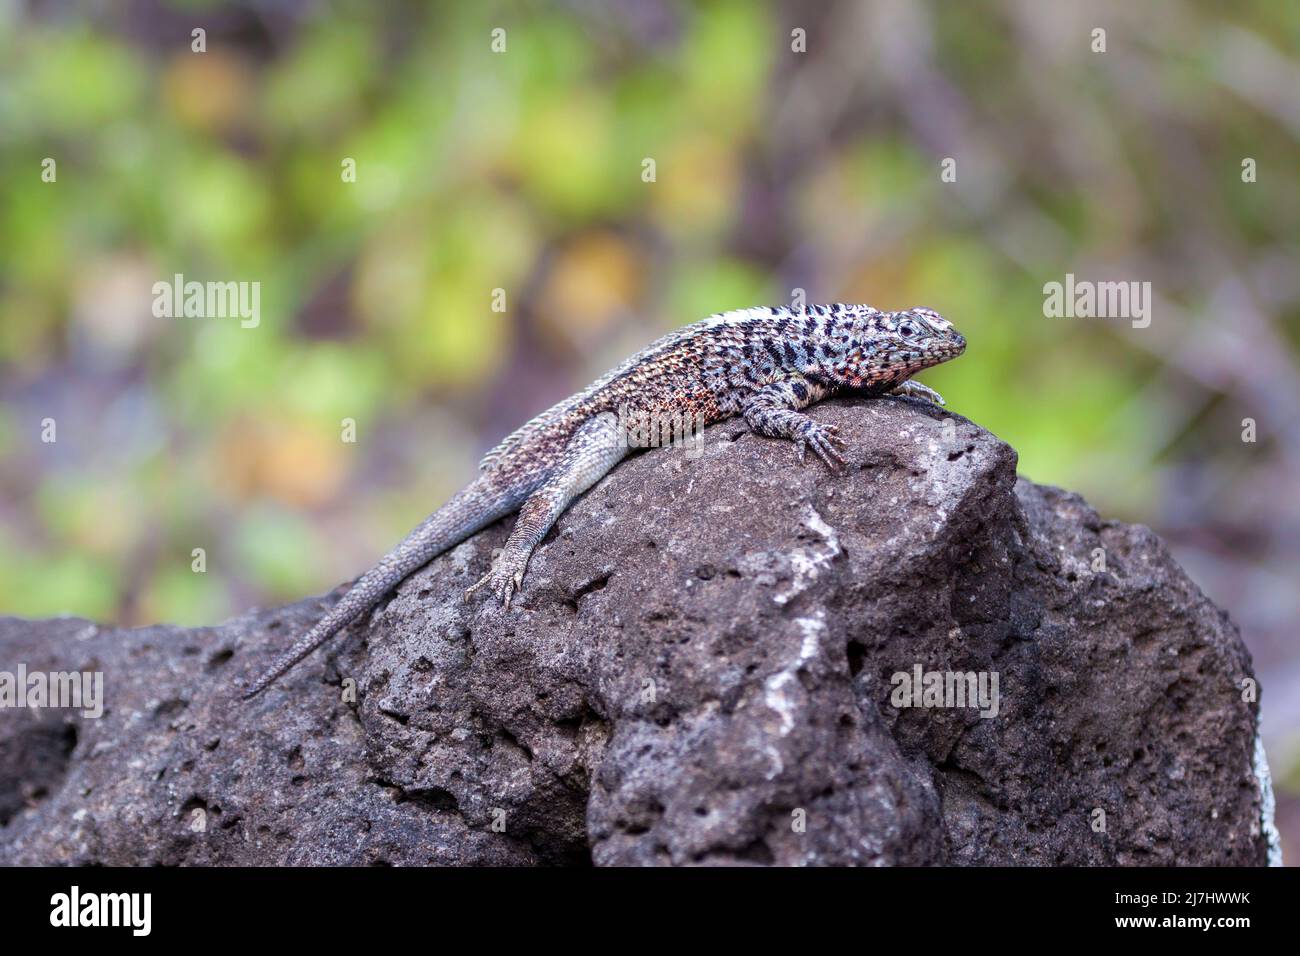 The galapagos lava lizard, Microlophus albemarlensis, is a species only found on the Galapagos islands in Ecuador. Stock Photo